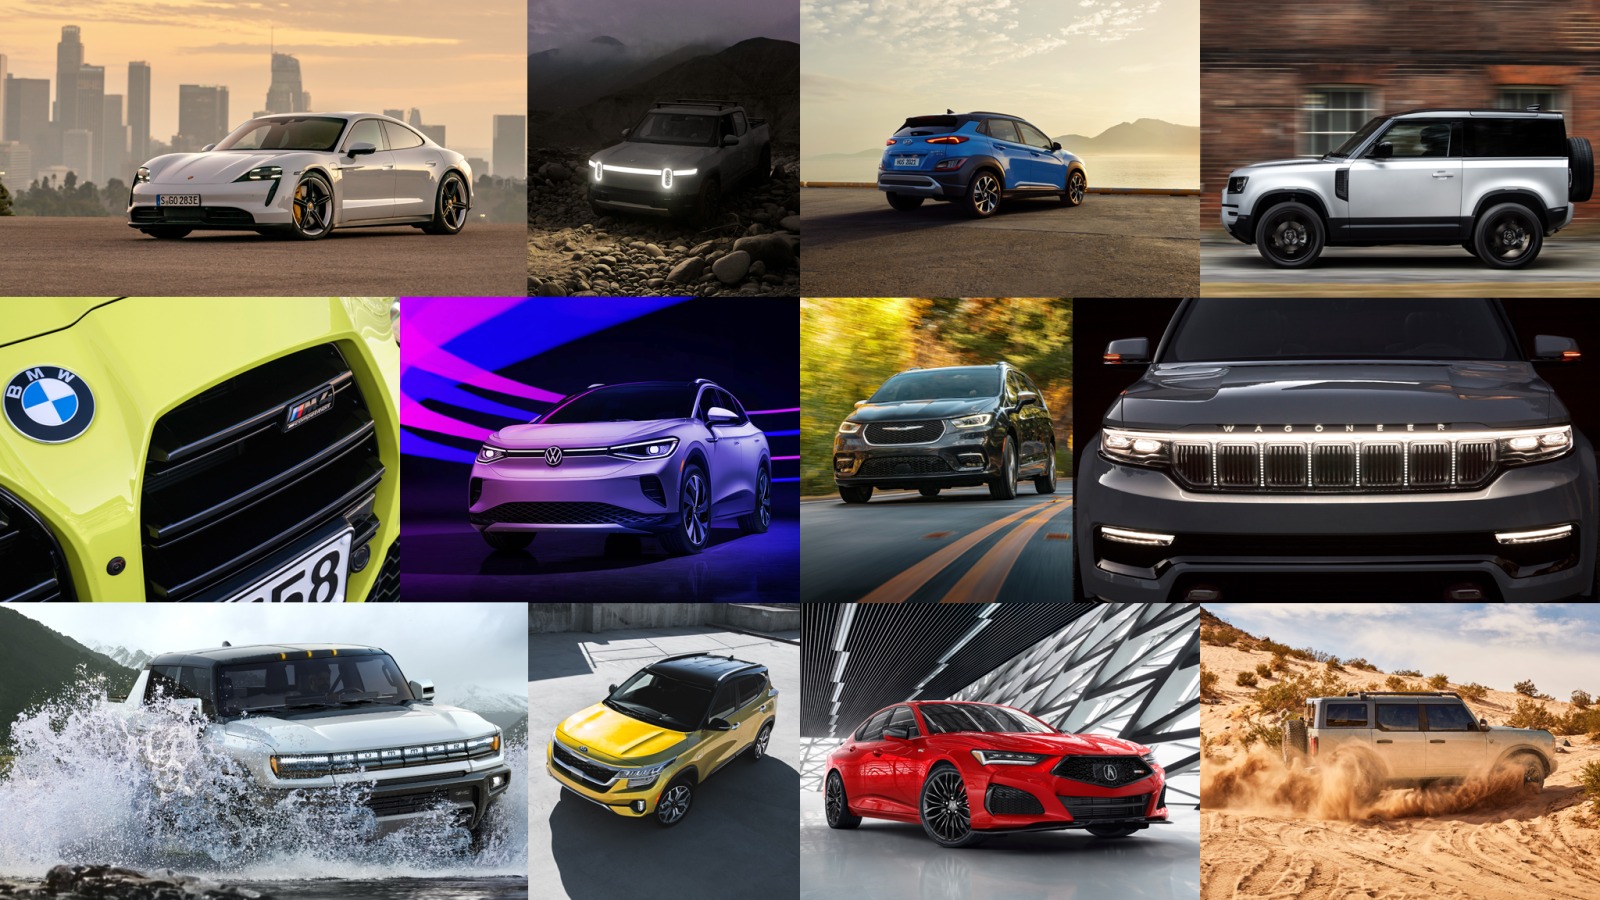 Revealed: The Hot New Cars of 2021-2022